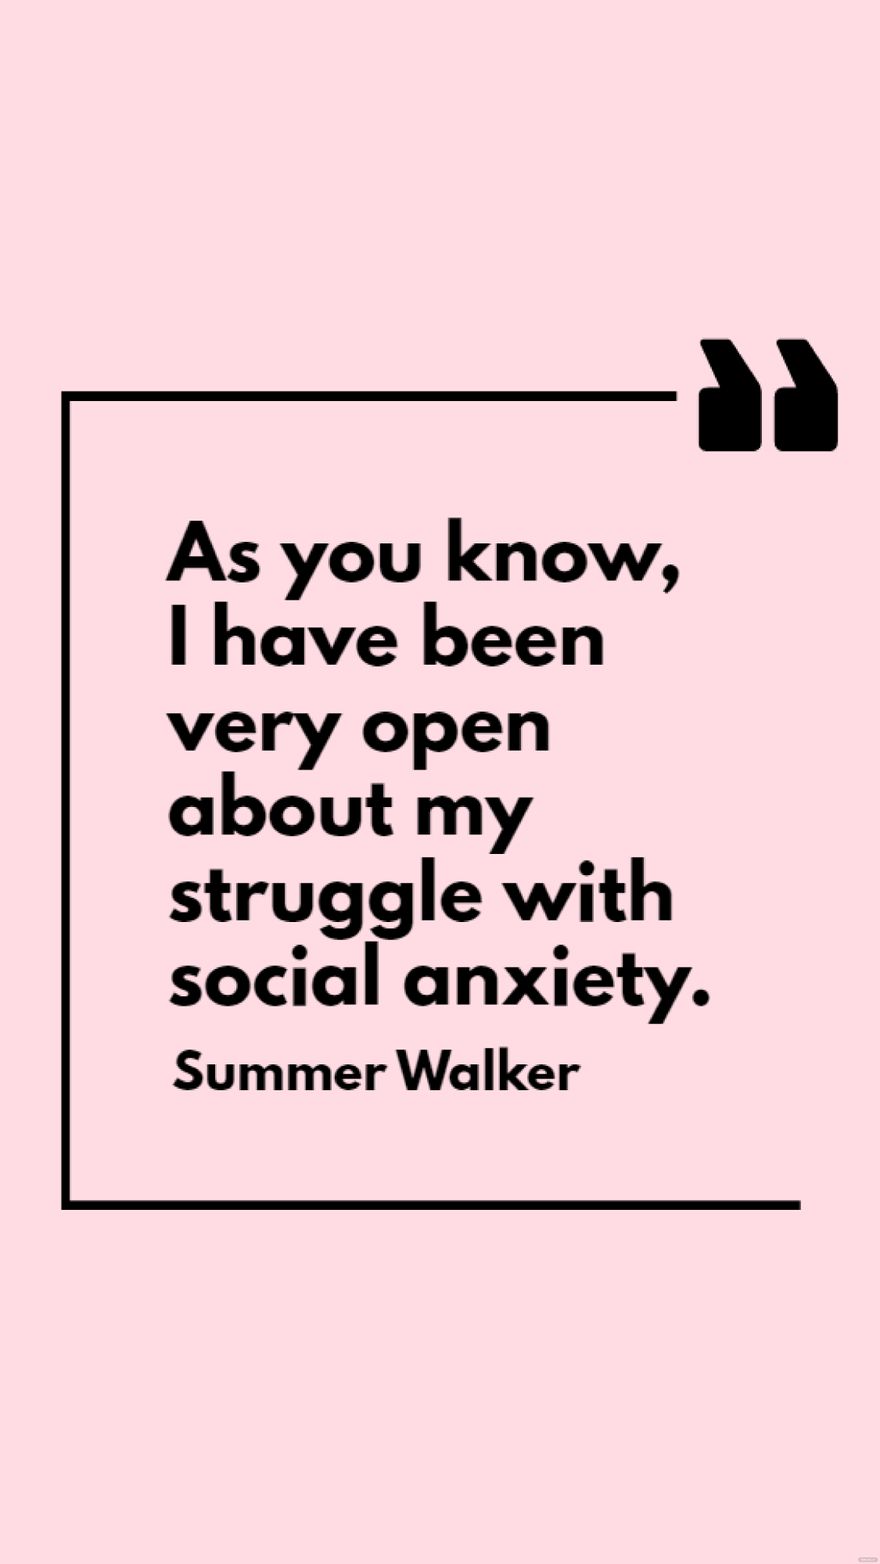 Summer Walker - As you know, I have been very open about my struggle with social anxiety.